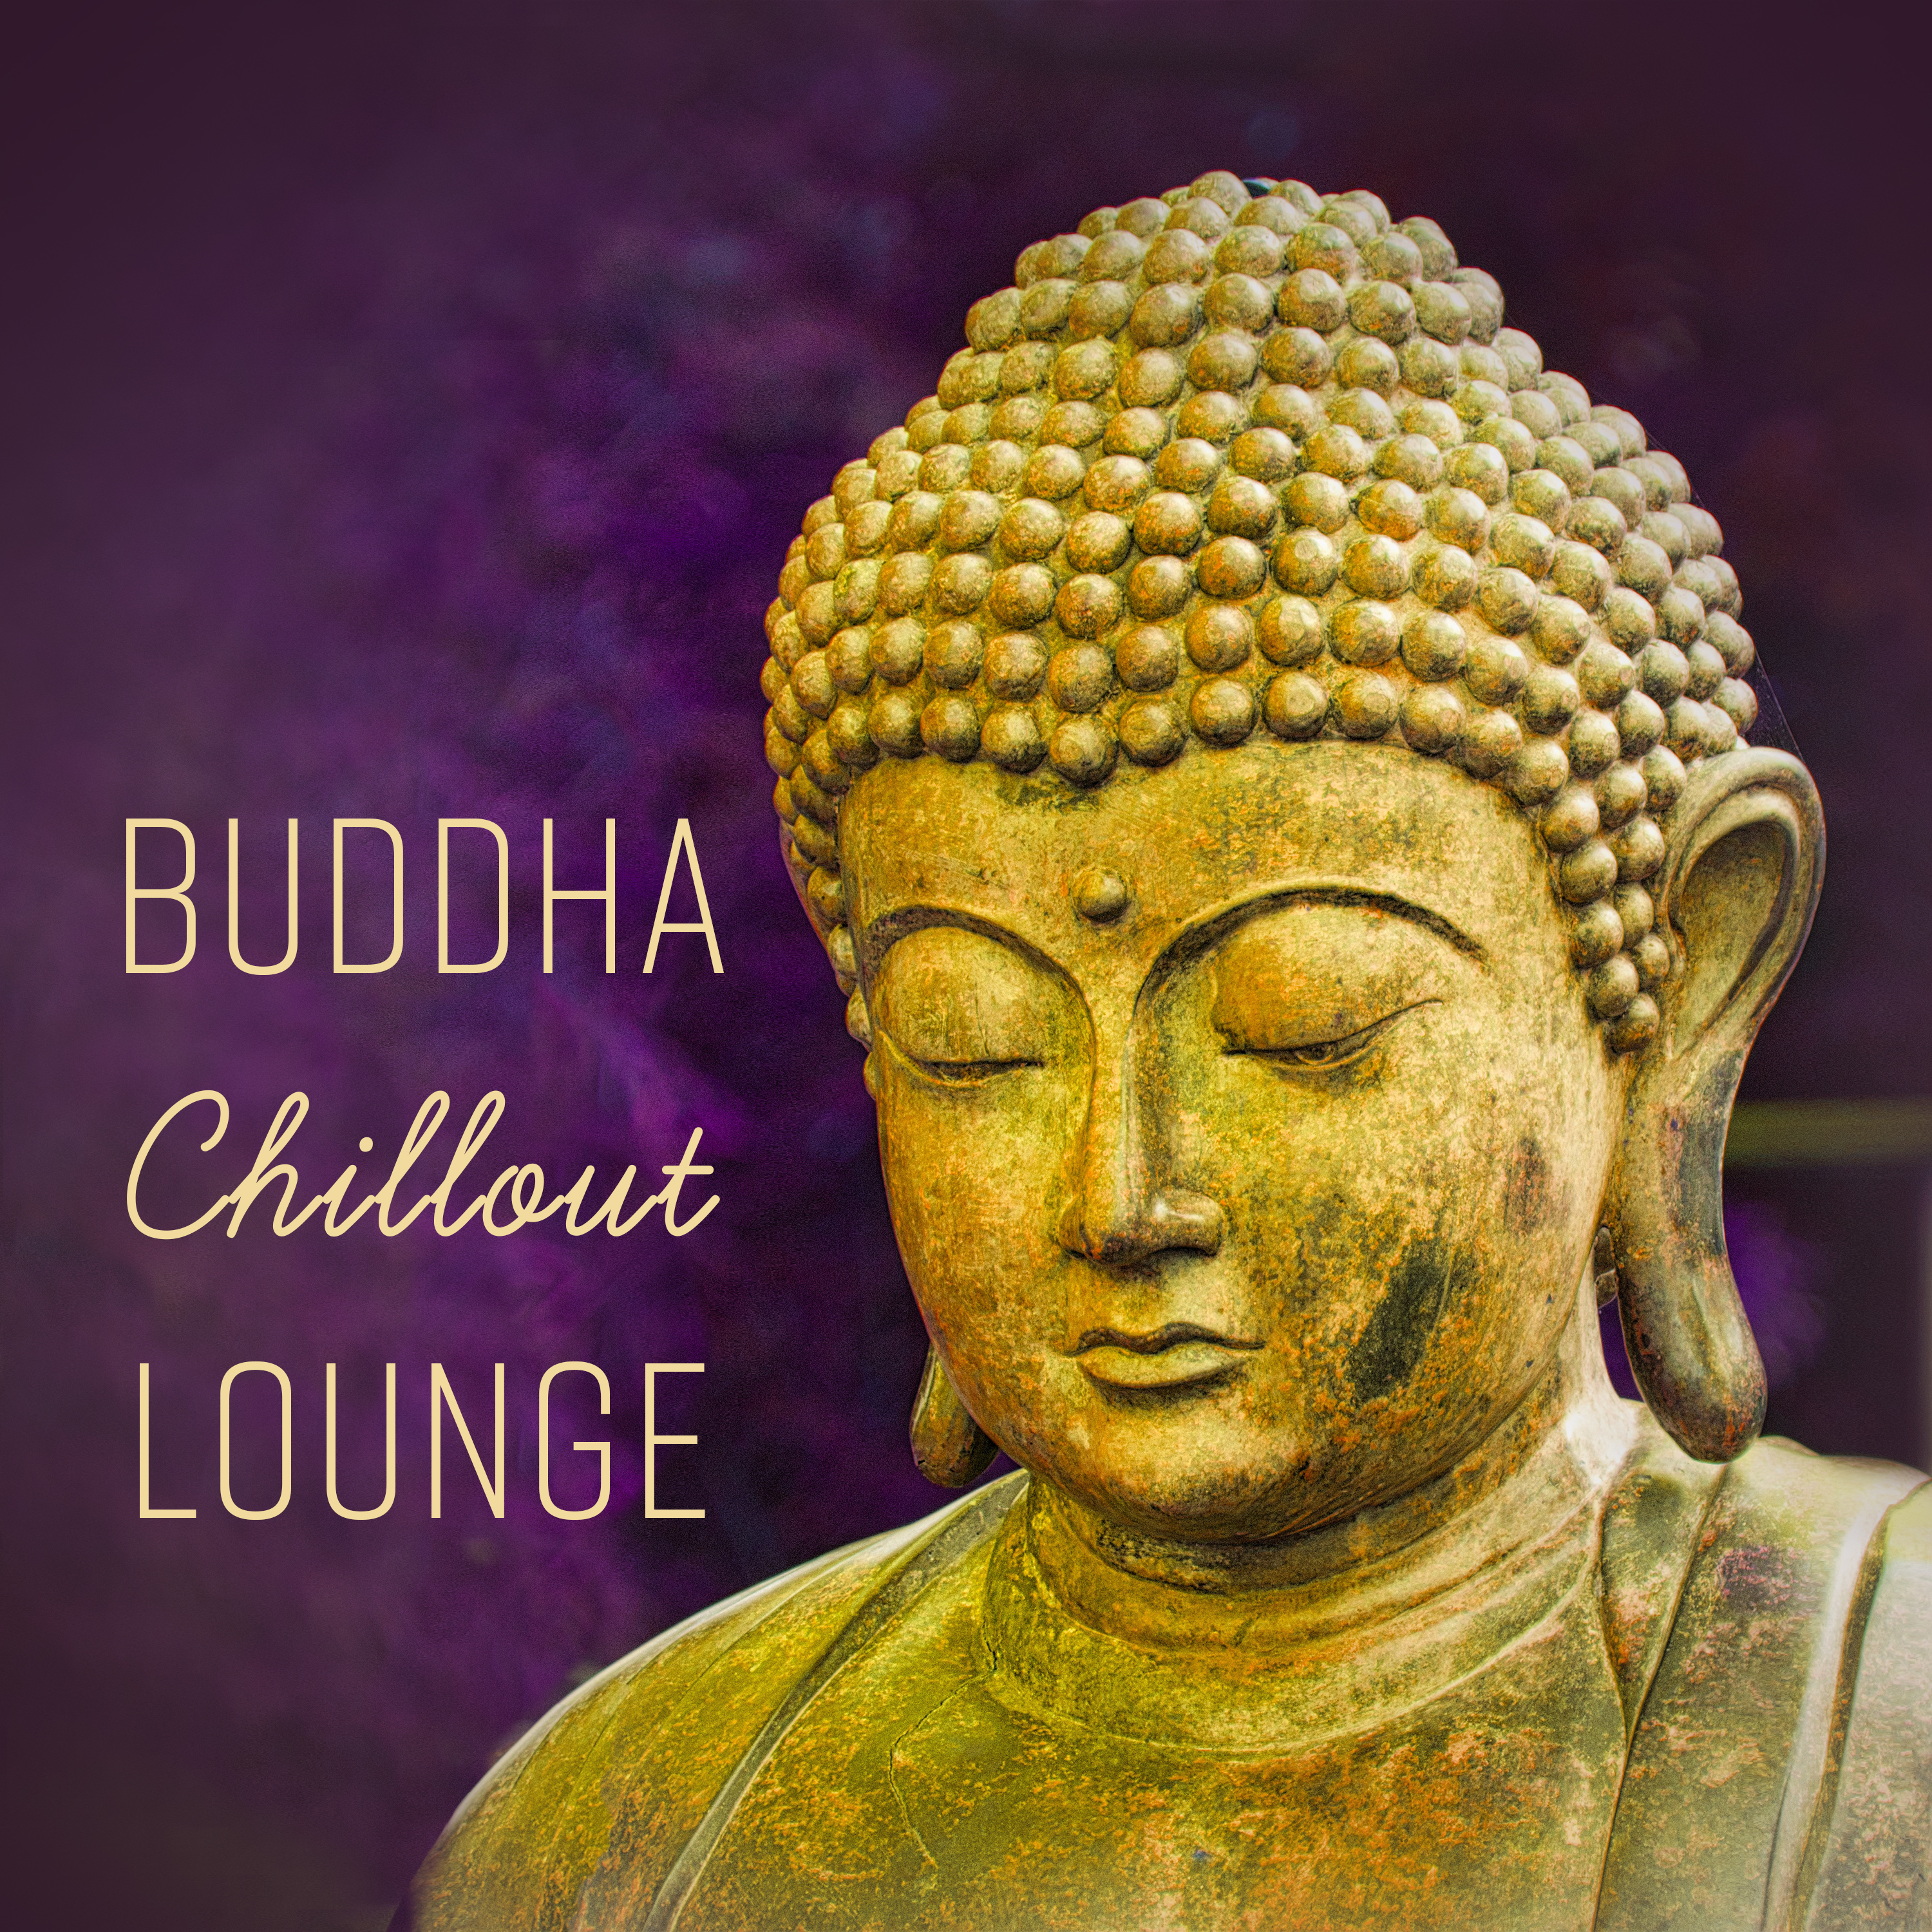 Buddha Chillout Lounge - Resort for Your Soul, Mystical Grooves, Hypnotic Rhythms, De-Stress and Unwind